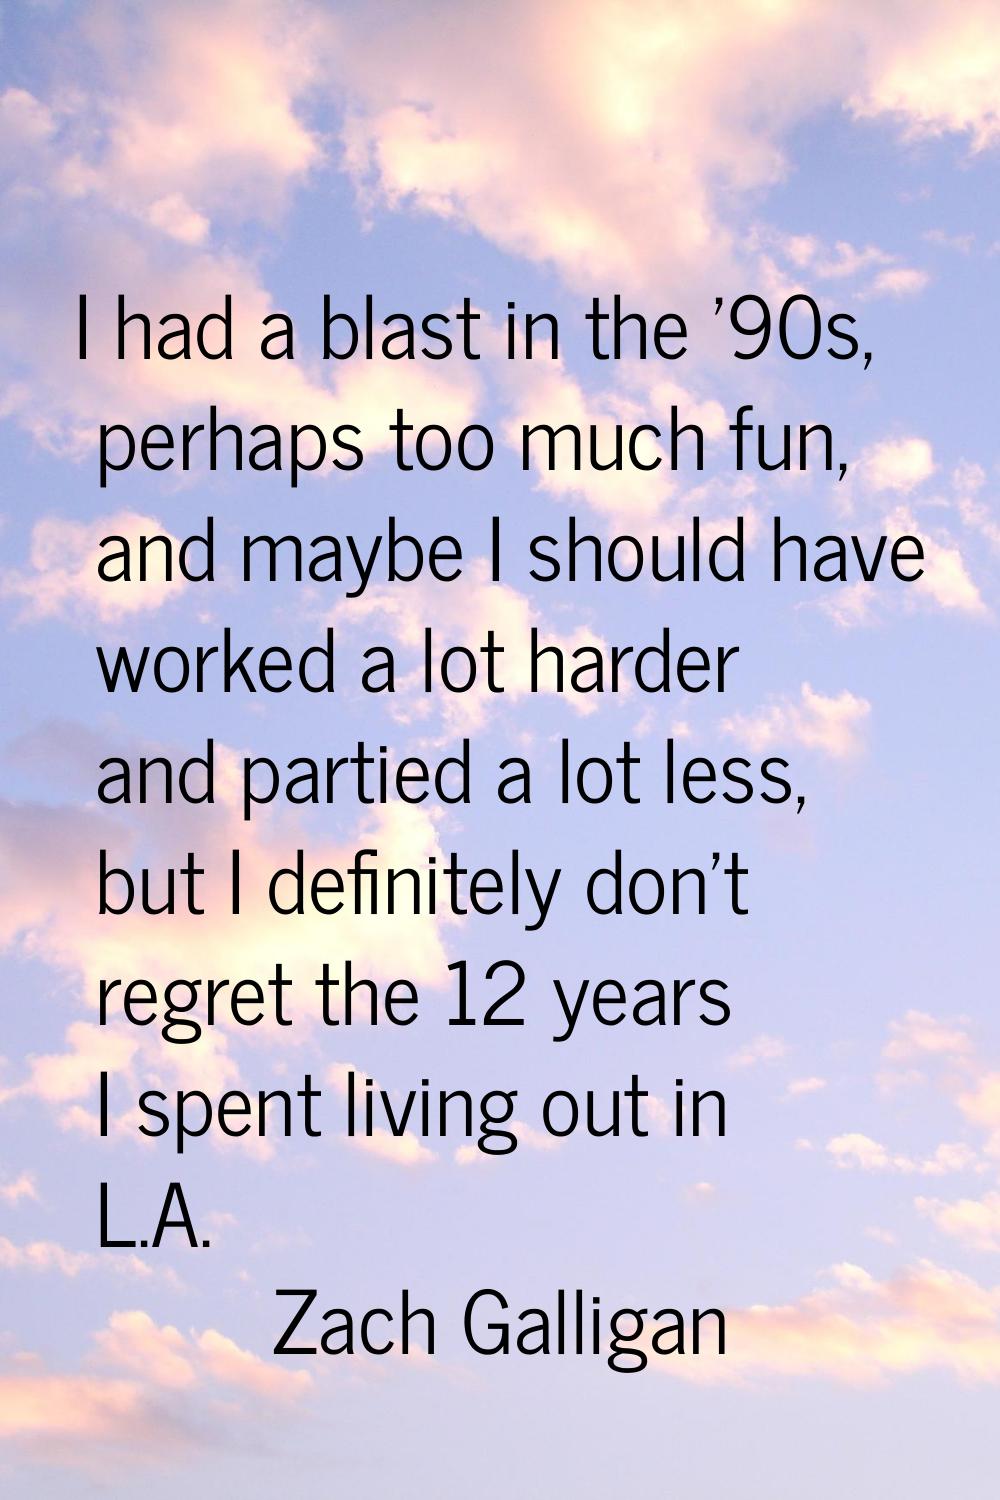 I had a blast in the '90s, perhaps too much fun, and maybe I should have worked a lot harder and pa